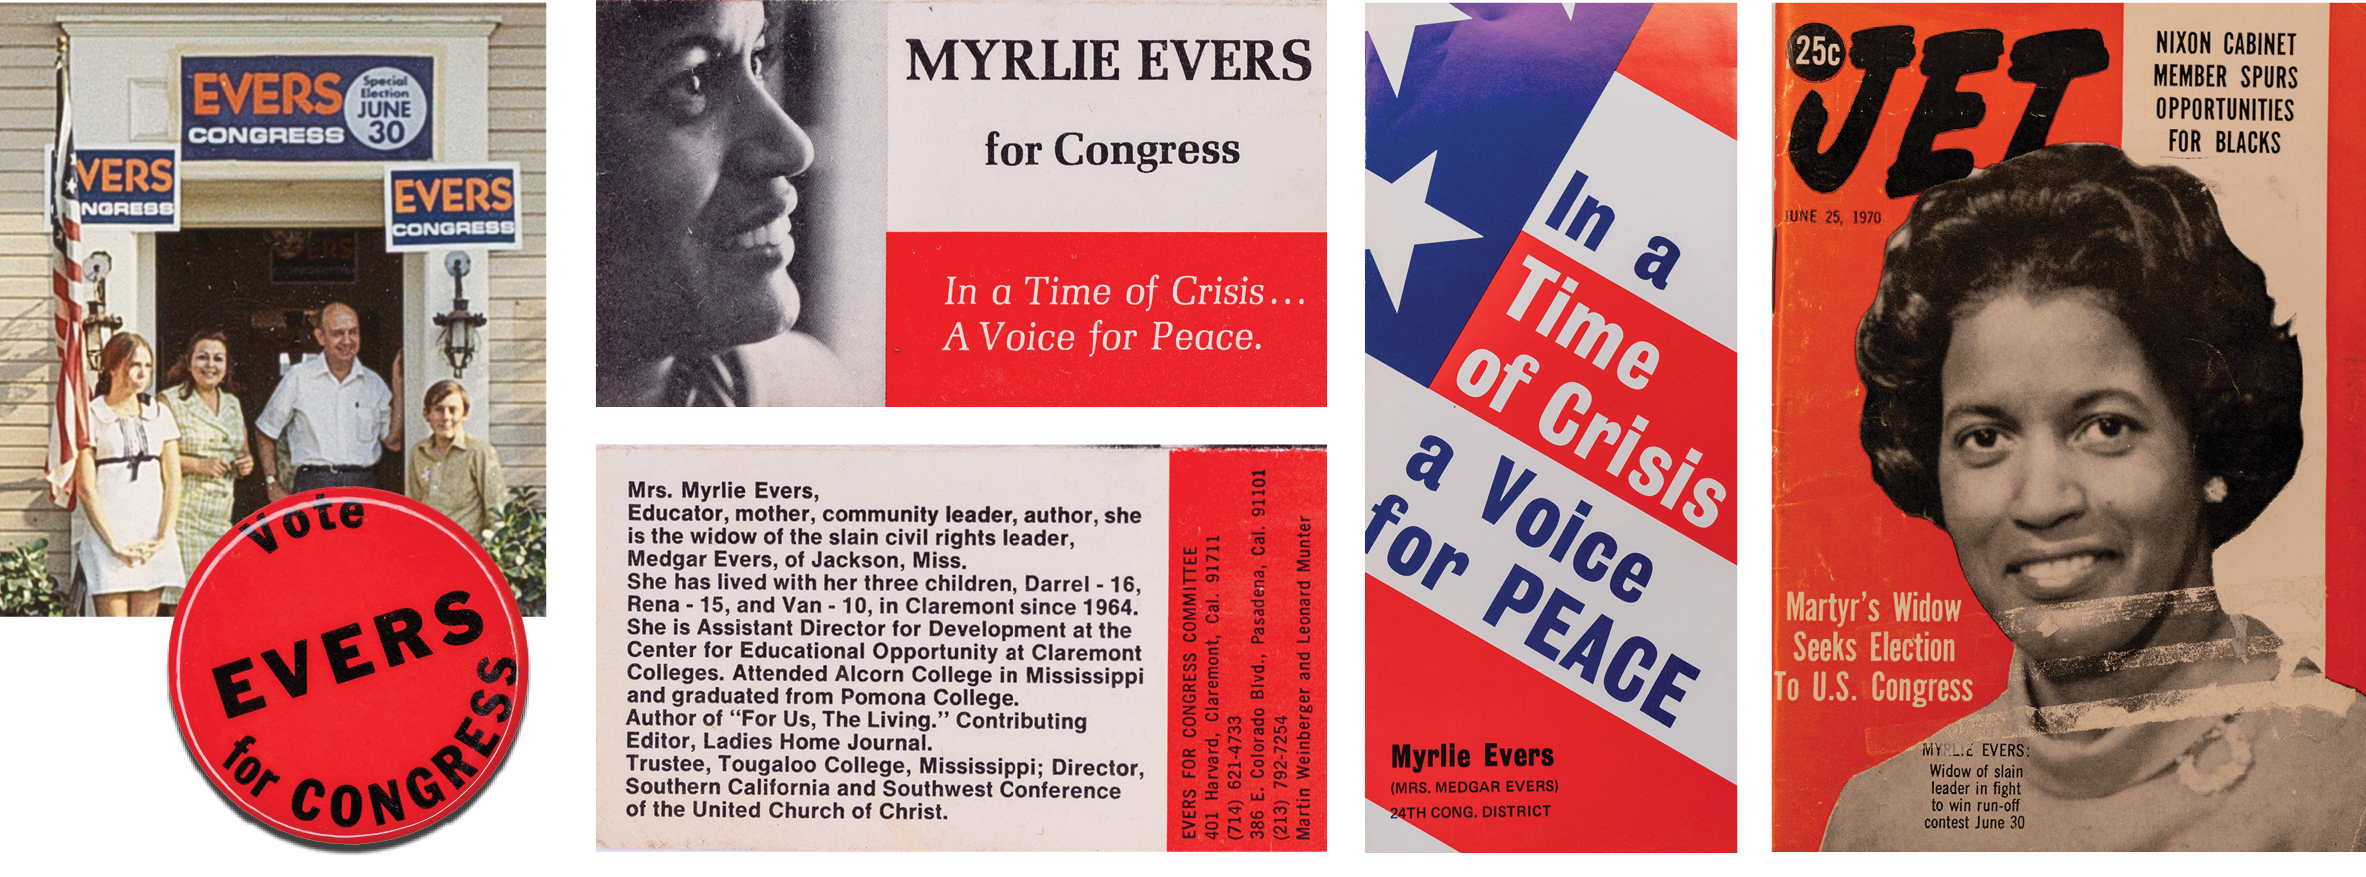 From left: Campaign literature and button from the 1970 bid Myrlie Evers made to represent her California district in the U.S. House of Representatives. She was defeated by Republican John H. Rousselot. Cover of Jet magazine featuring Myrlie Evers from June 1970.